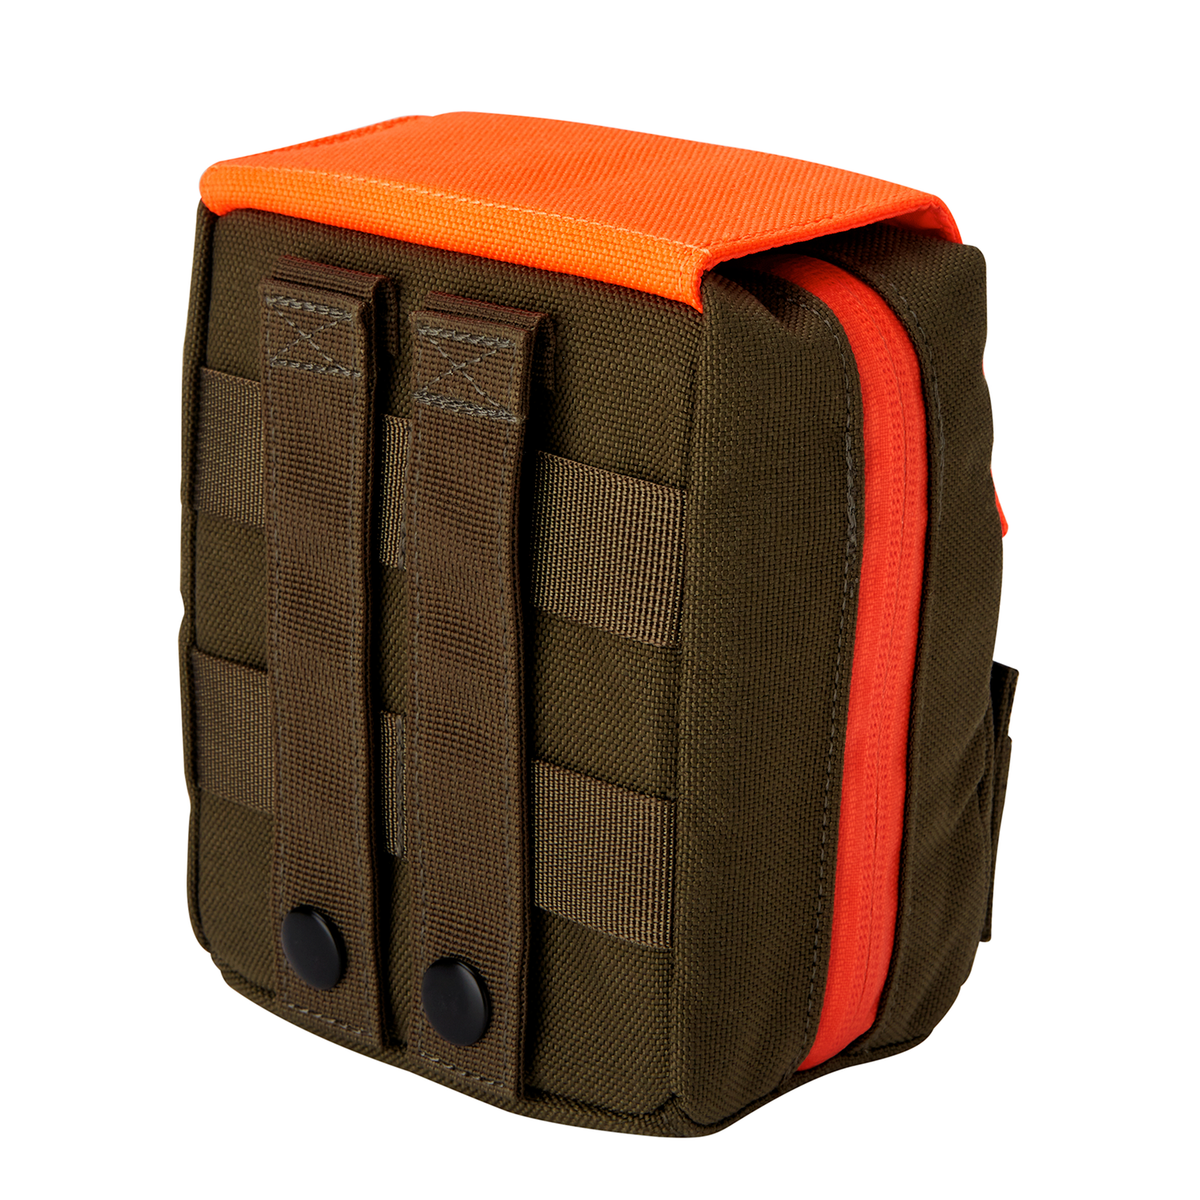 Miles MOLLE Multi-tool Pouch with Magnetic closure